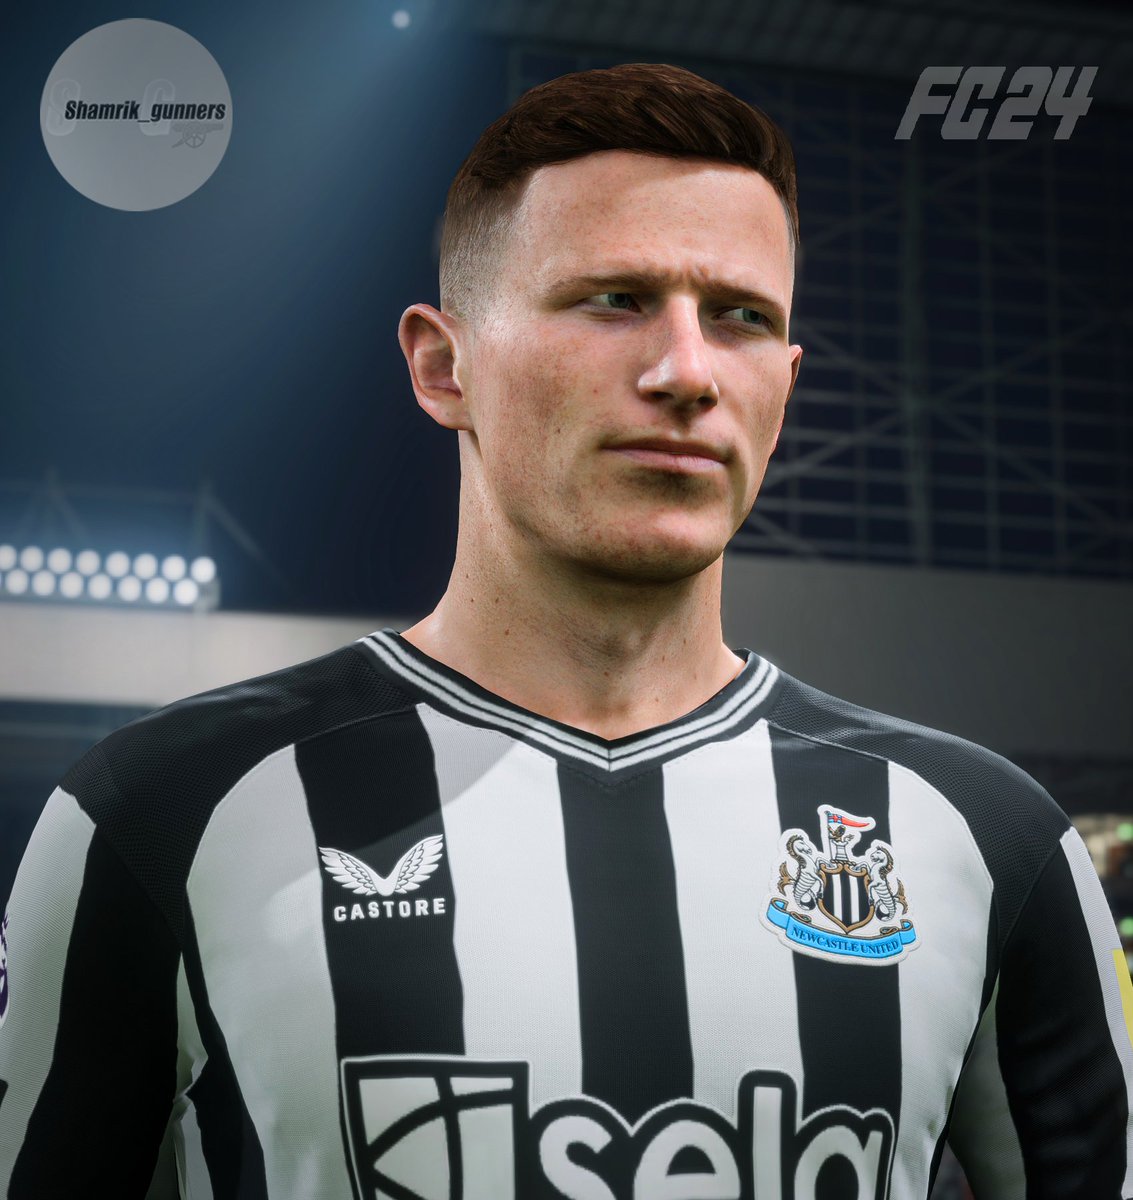 Elliot Anderson - Release🔥🔥🔥 #EAFC4 & #FIFA23 🏴󠁧󠁢󠁳󠁣󠁴󠁿 🖇️Download link in bio! Available for EA FC24 and FIFA 23! #FC24 #EAFC24 #FUT @FIFER_Mods